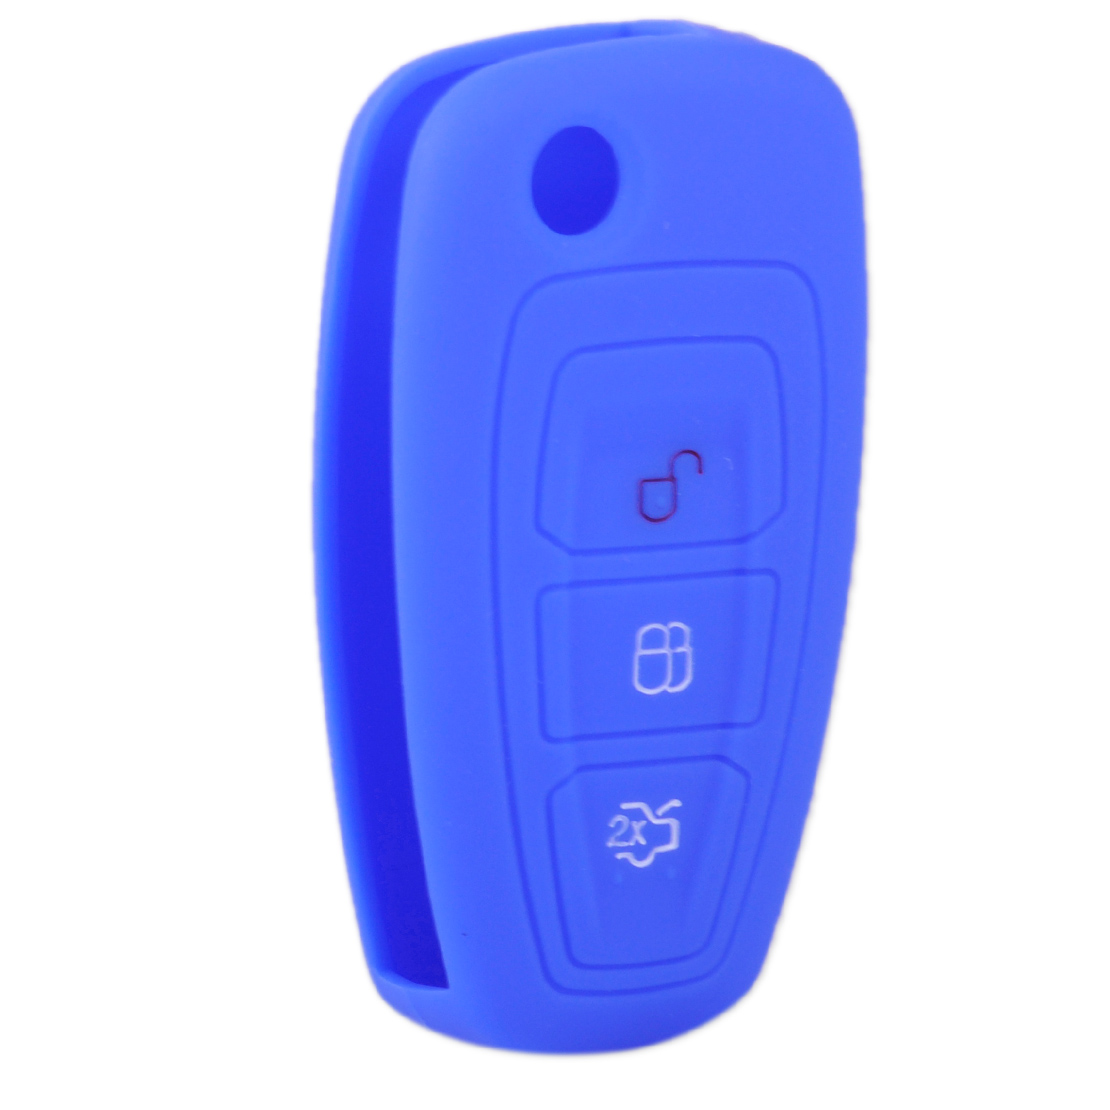 Silicone Cover fit for FORD Mondeo Edge Smart Remote Key 3 BTN Hollowed 9706 BK 